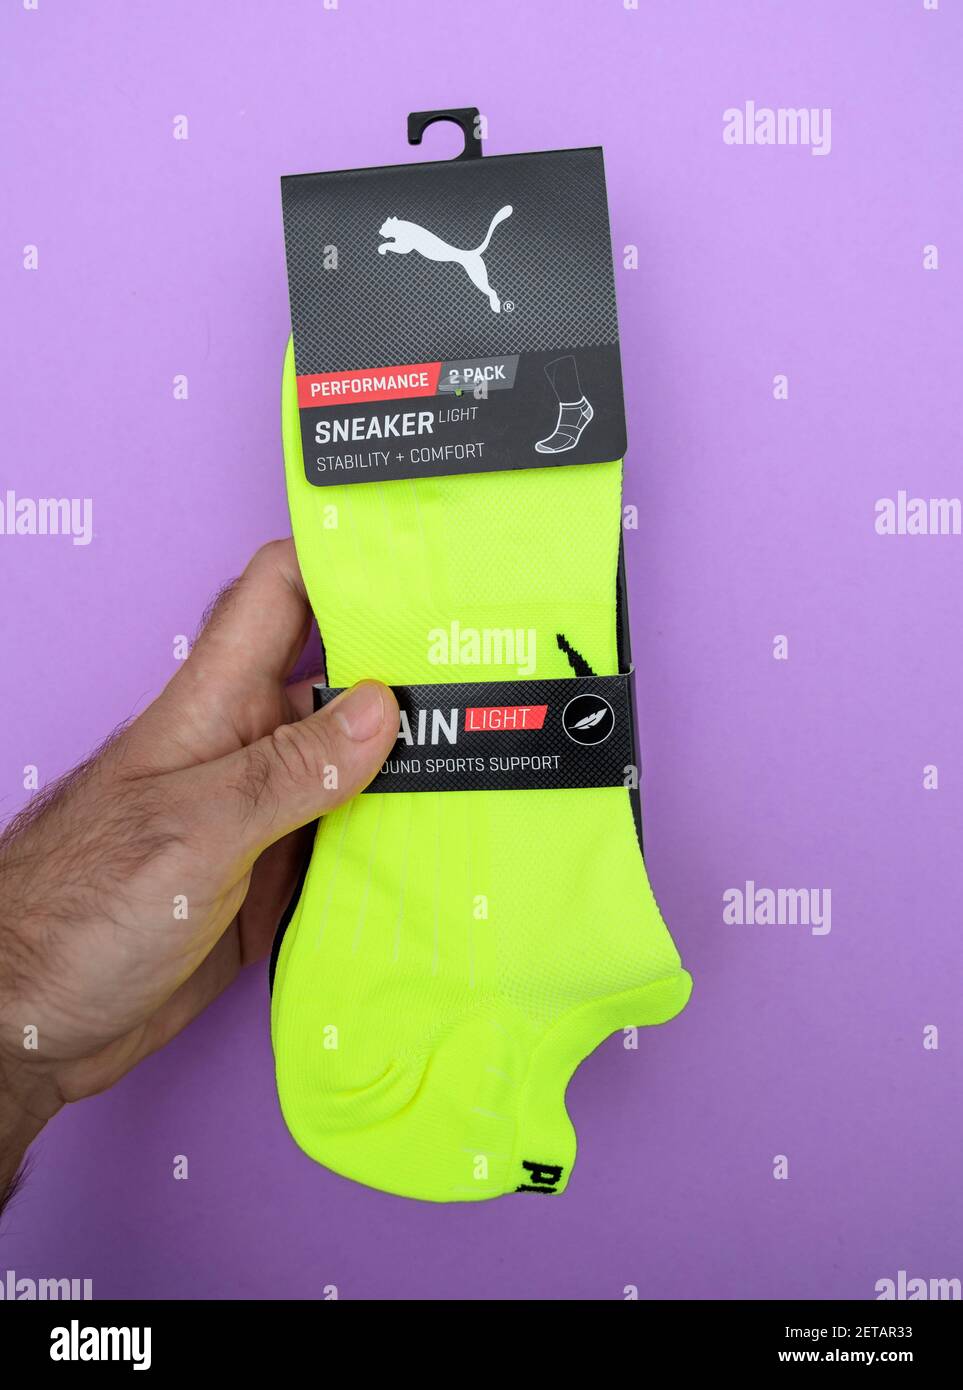 Paris, France - Oct 8, 2018: POV male hand holding new pair of Puma Sneaker  Light performance socks in vivid green color - isolated on violet  background Stock Photo - Alamy